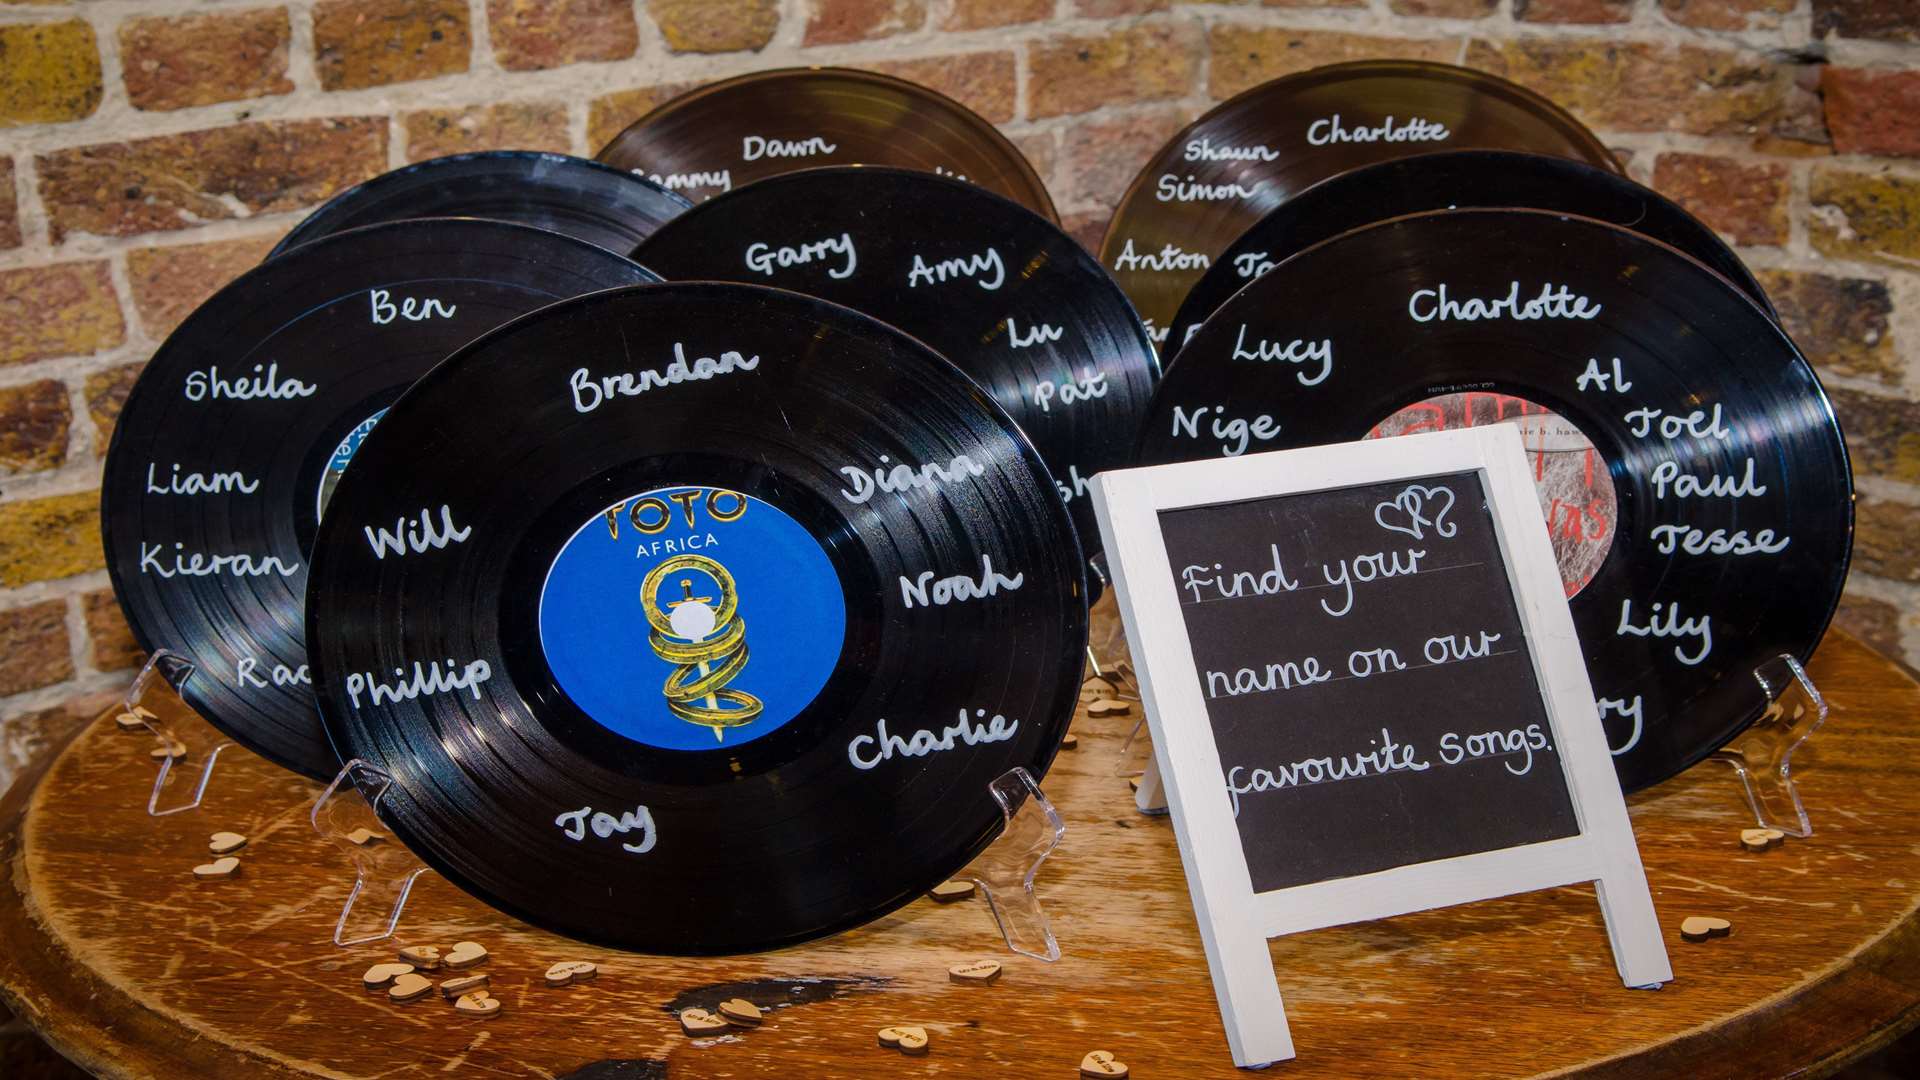 Our table planner was made up of vinyls with our favourite songs on them